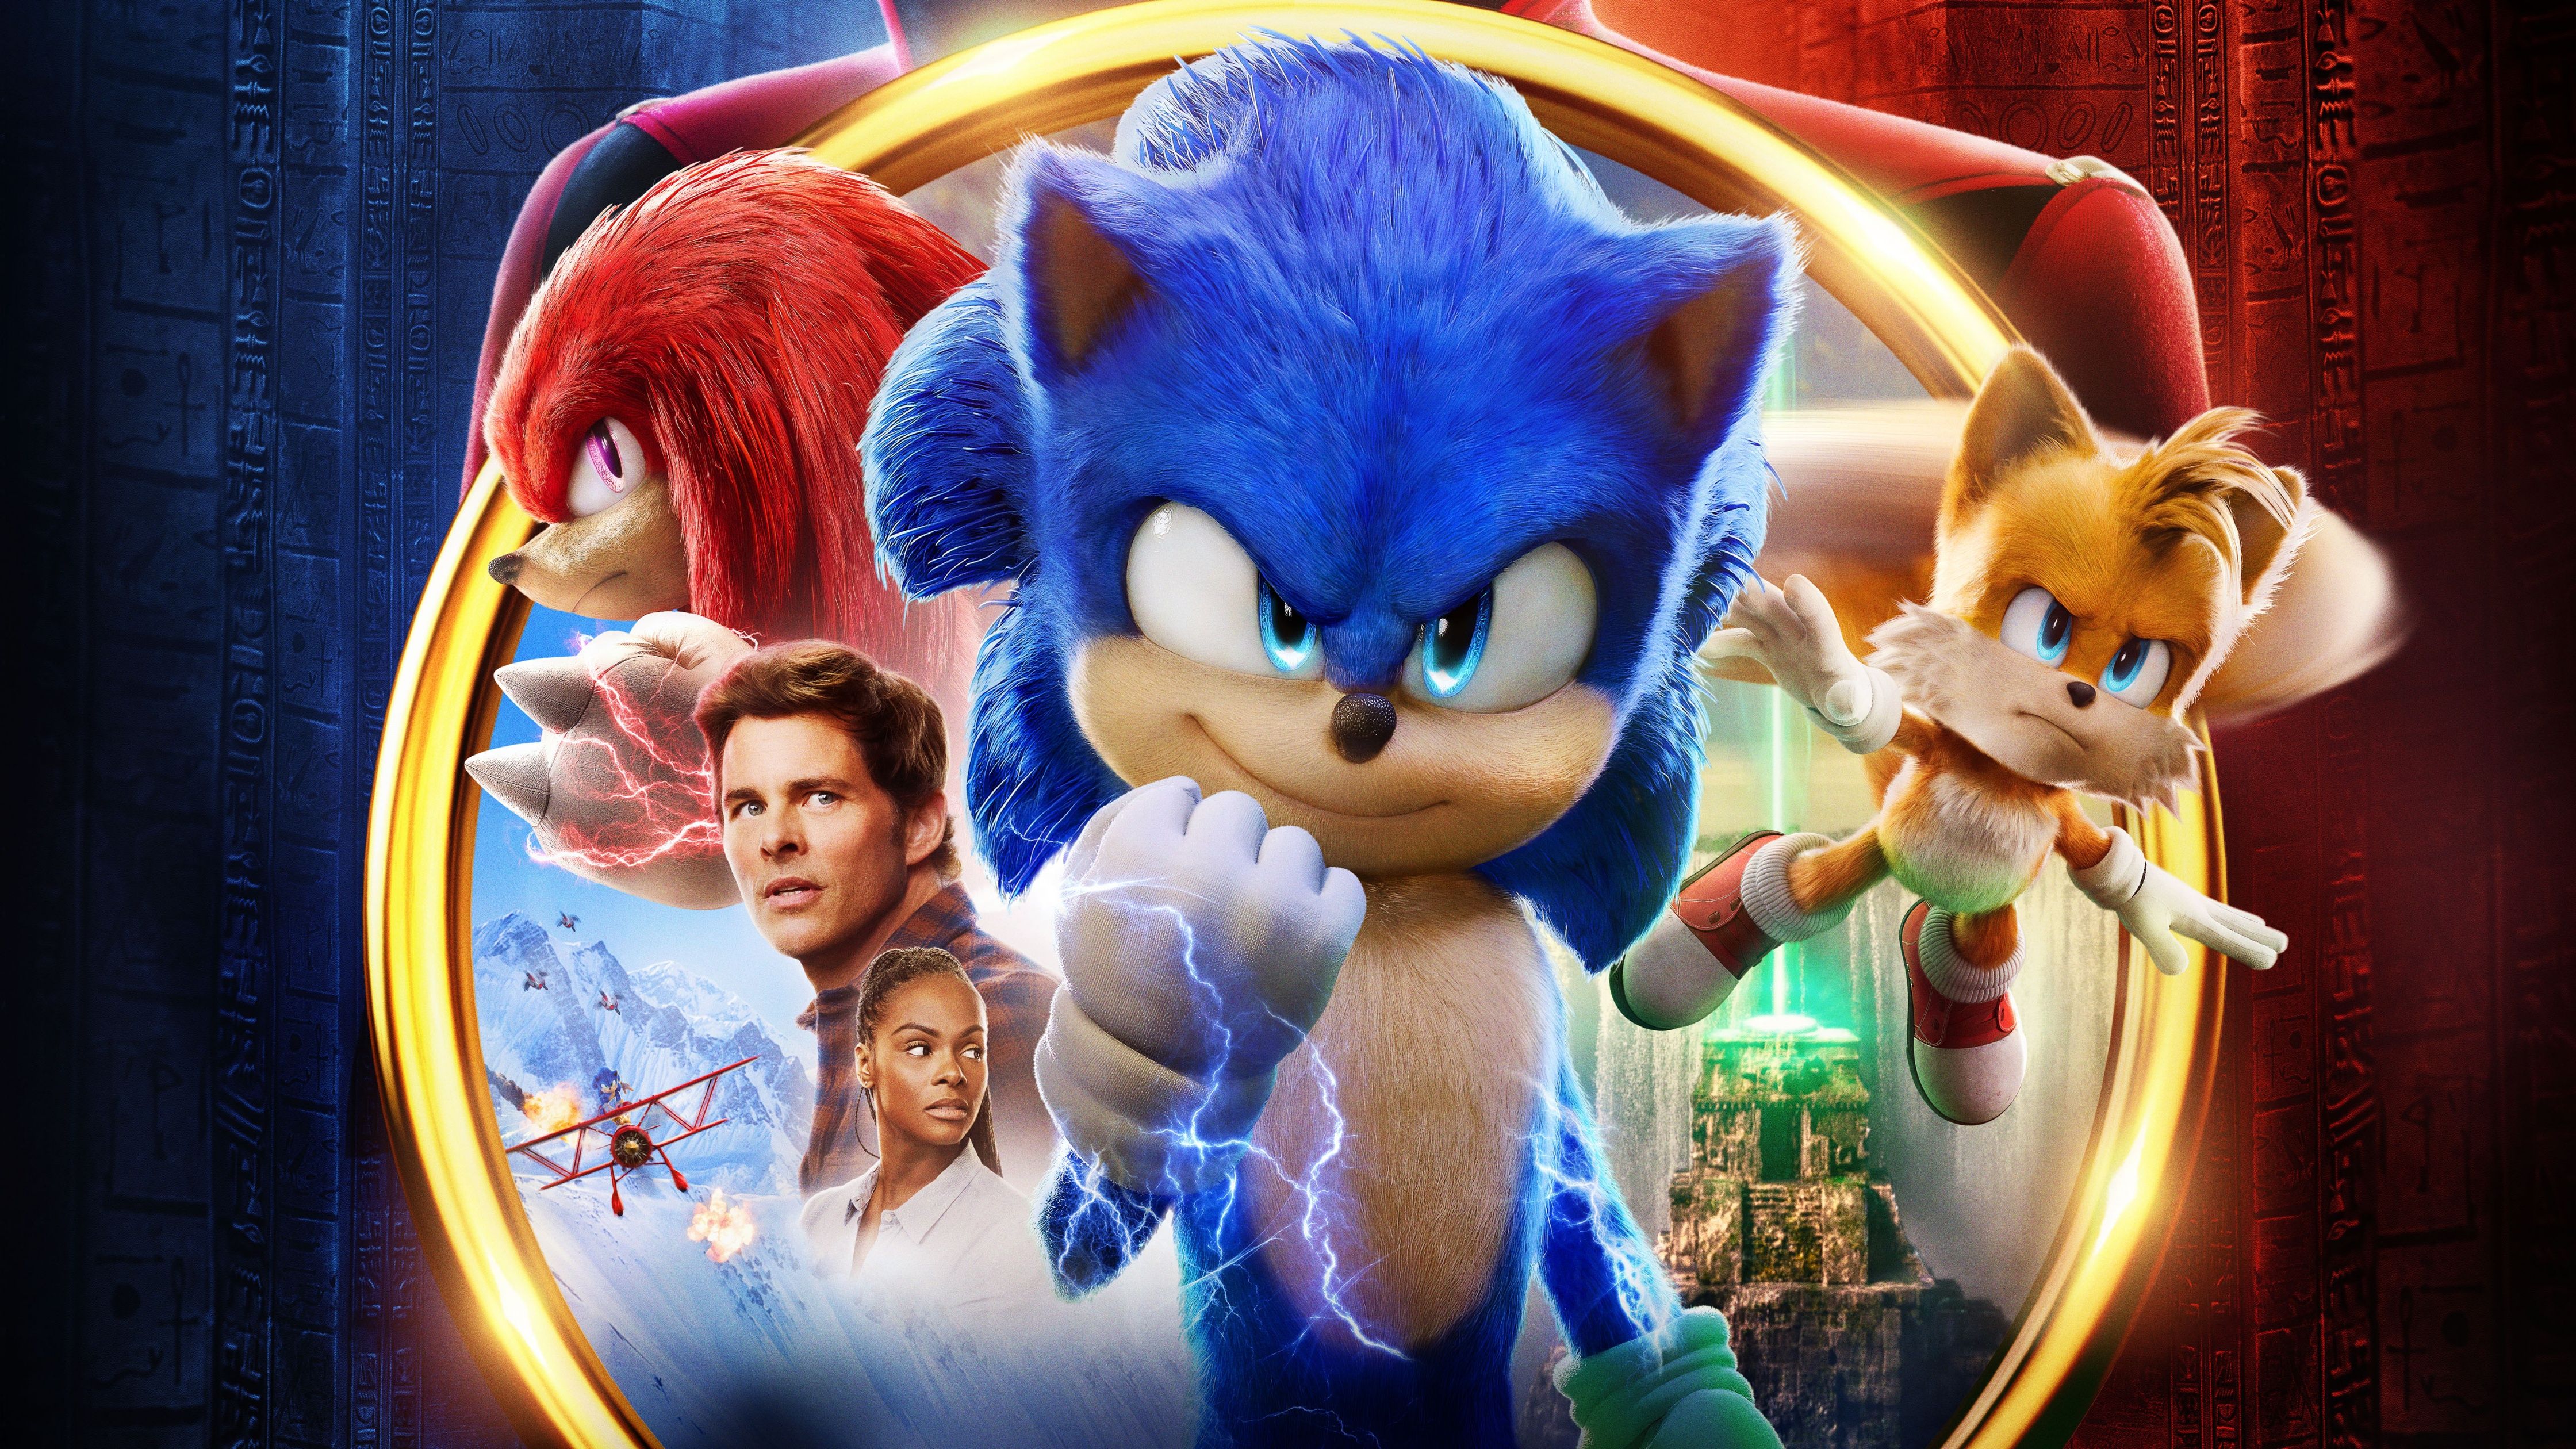 Sonic the Hedgehog 2020 movie poster - Sonic